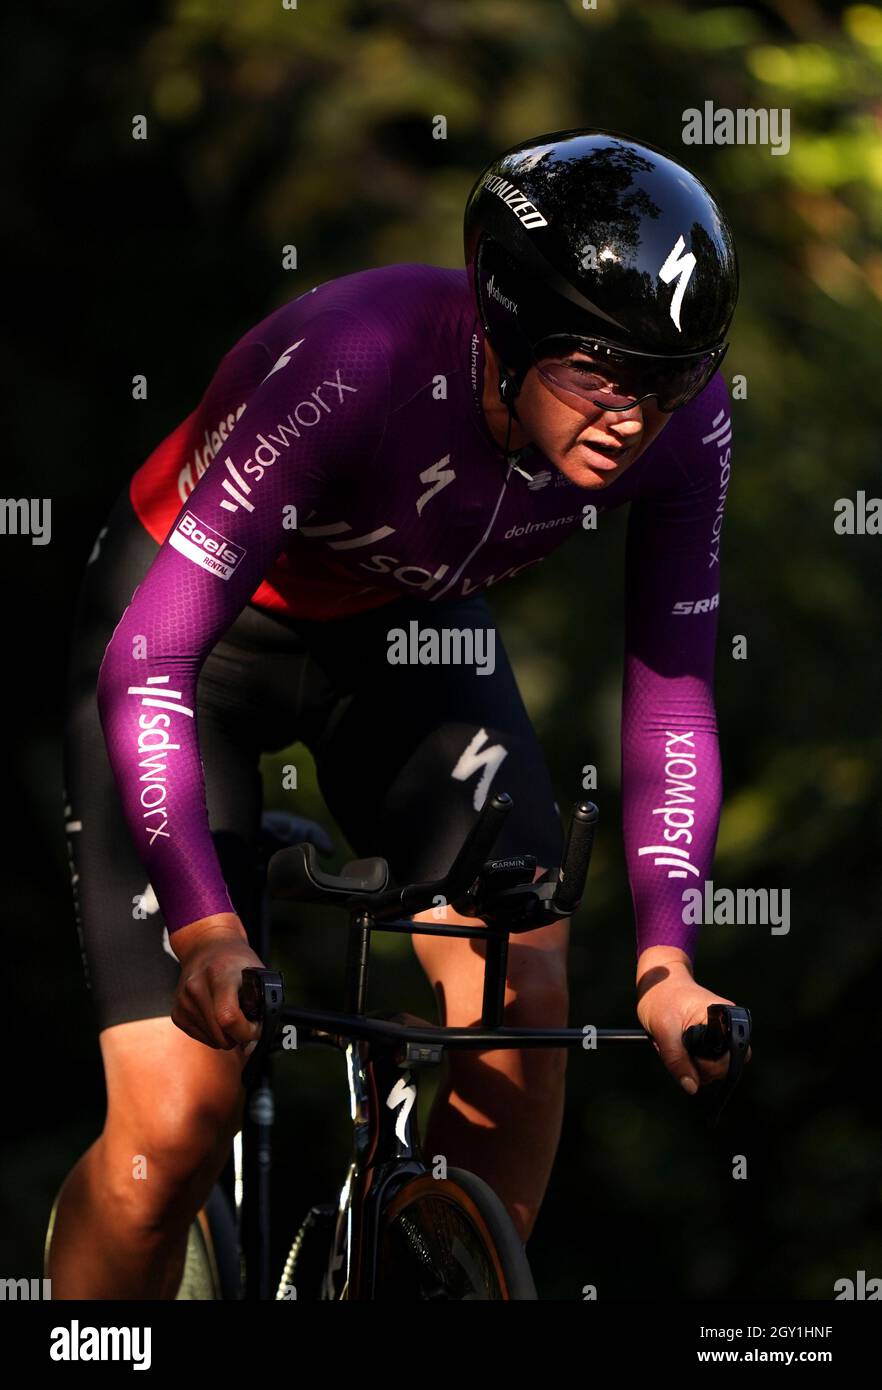 Chantel Blaak of Team SD Worx during the Stage Three Individual Time Trial of the AJ Bell Women's Tour in Atherstone, UK. Picture date: Wednesday October 6, 2021. Stock Photo